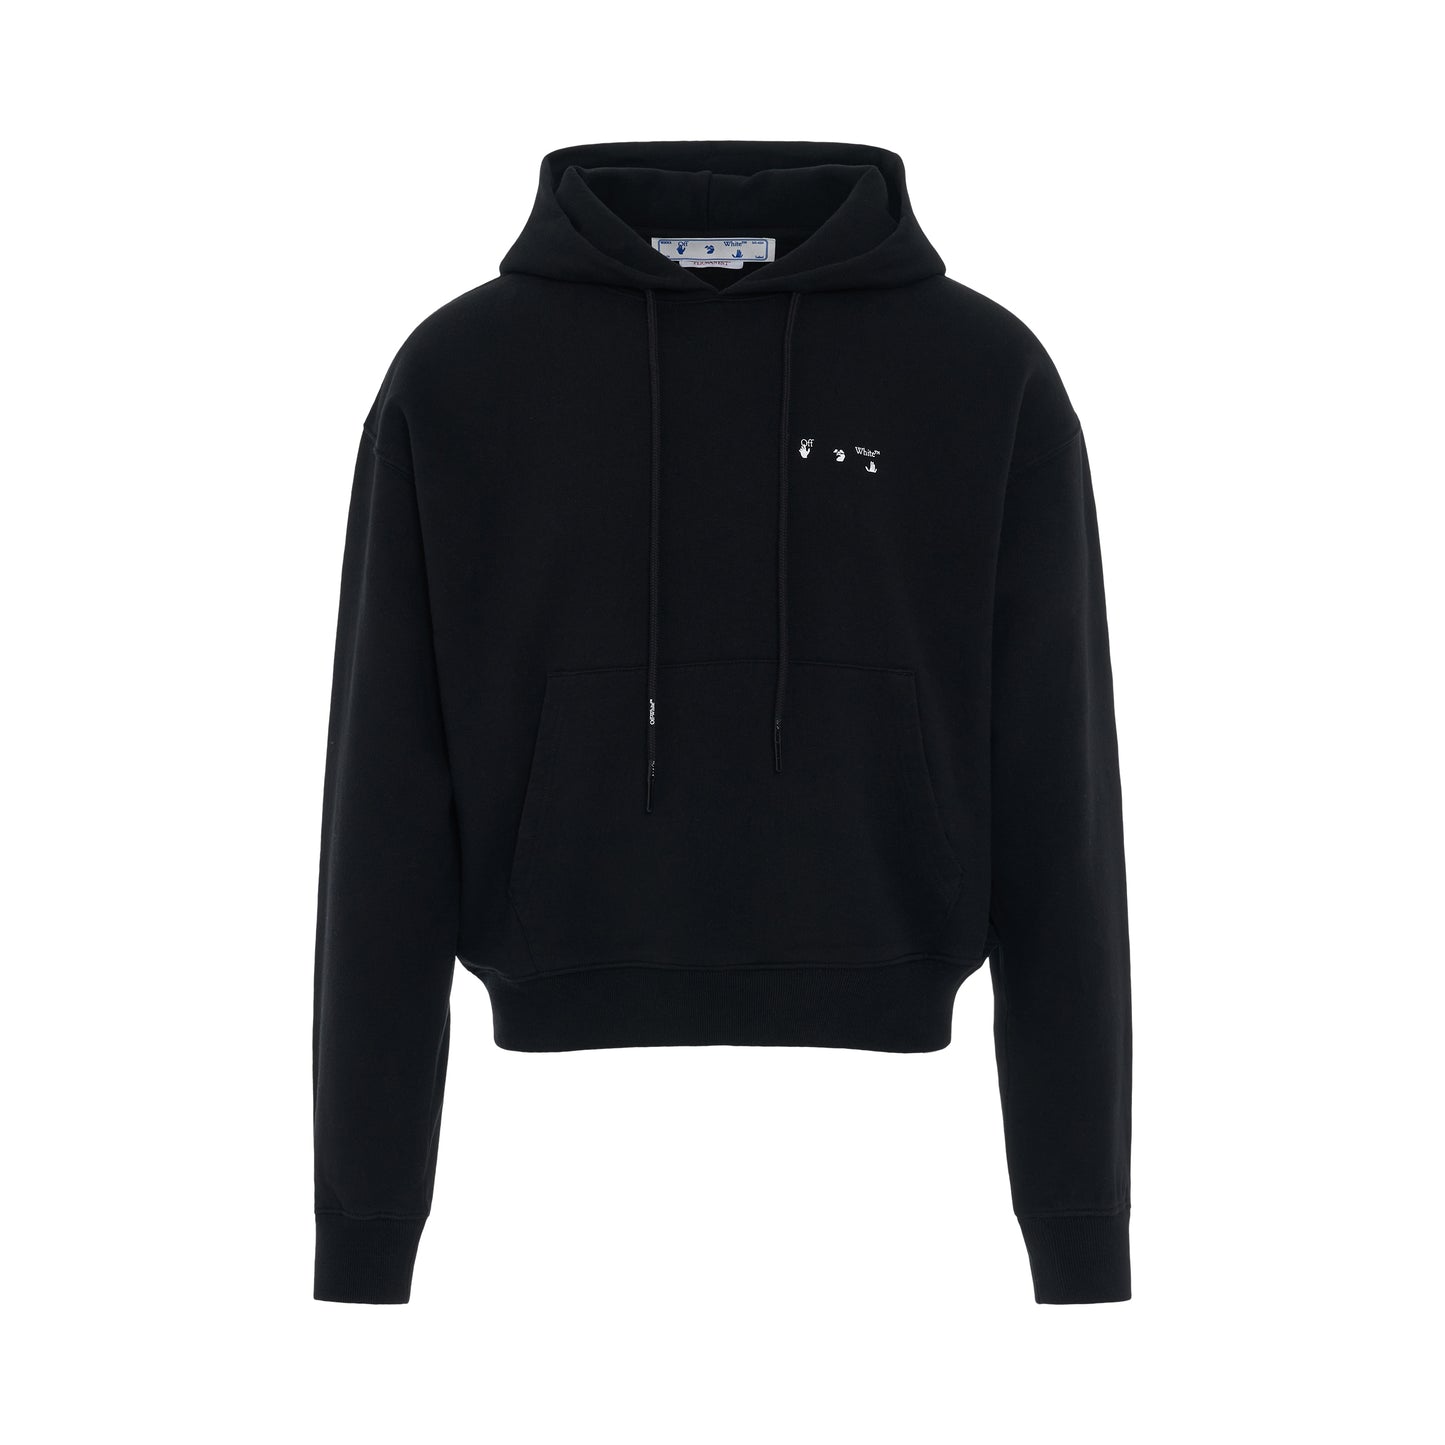 Caravaggio Paint Oversize Fit Hoodie in Black/White